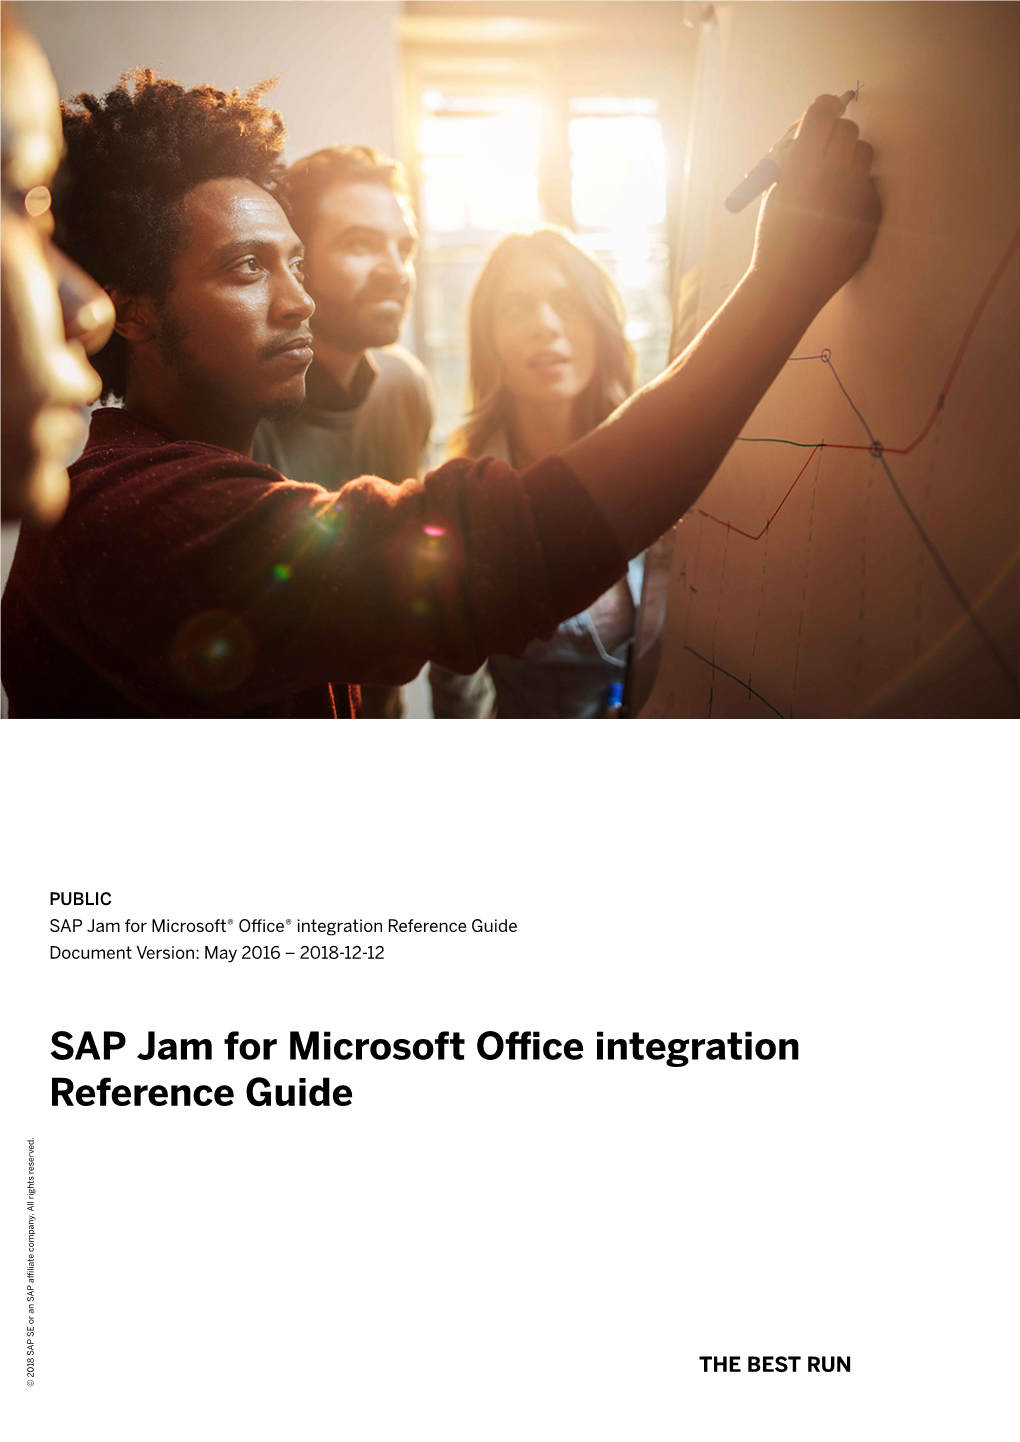 SAP Jam for Microsoft Office Integration Reference Guide Company